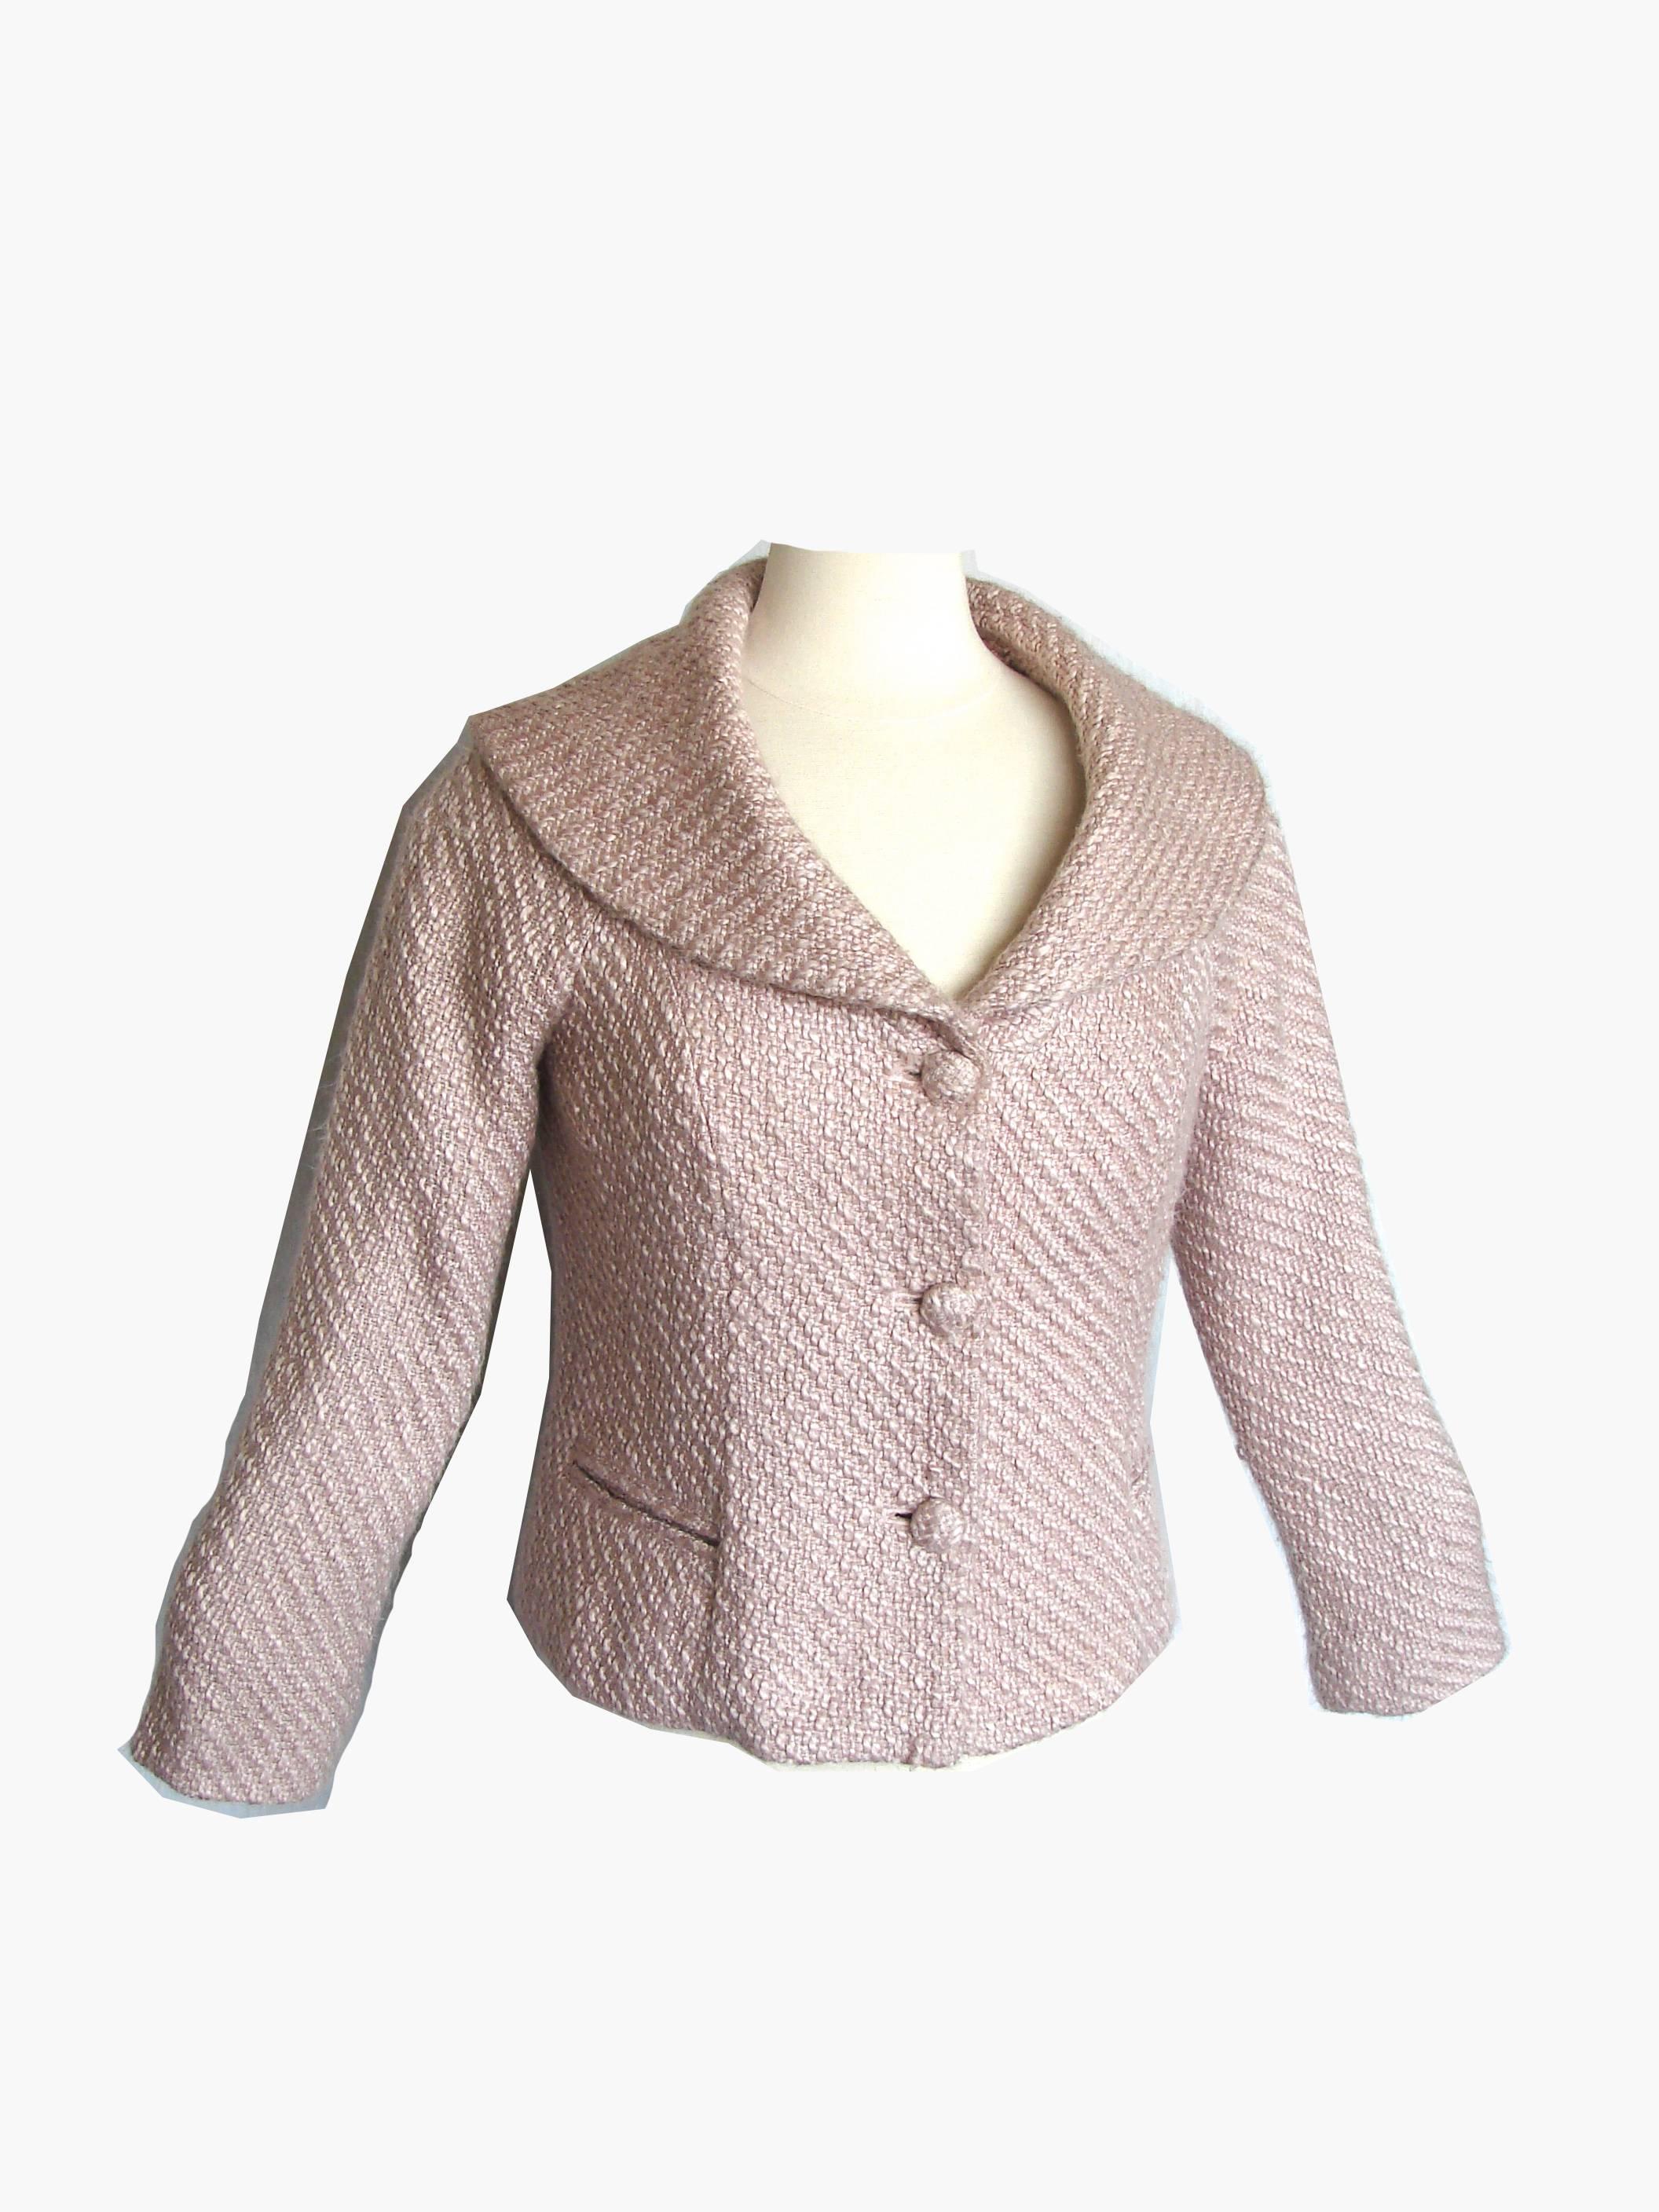 Pierre Cardin Pale Pink Knit Jacket with Shawl Collar 1980s Size 8 1